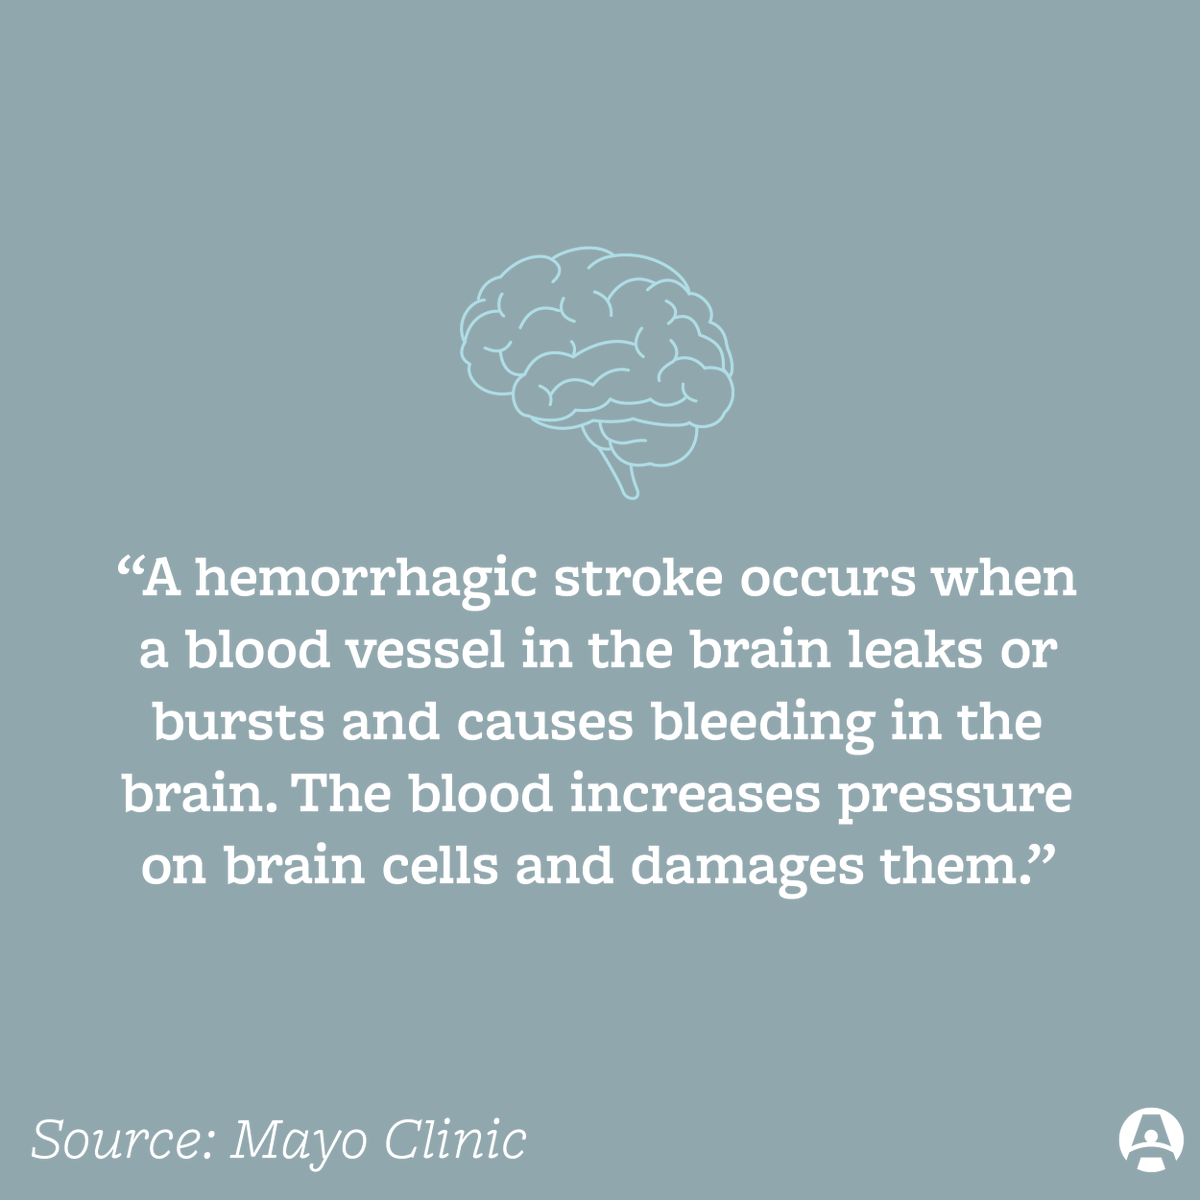 It's #StrokeAwarenessMonth! A stroke occurs in the brain, and is the 5th leading cause of death in the United States. Learn about the two main categories of #stroke by swiping through this post. If you experience symptoms of a stroke, call 9-1-1 immediately.